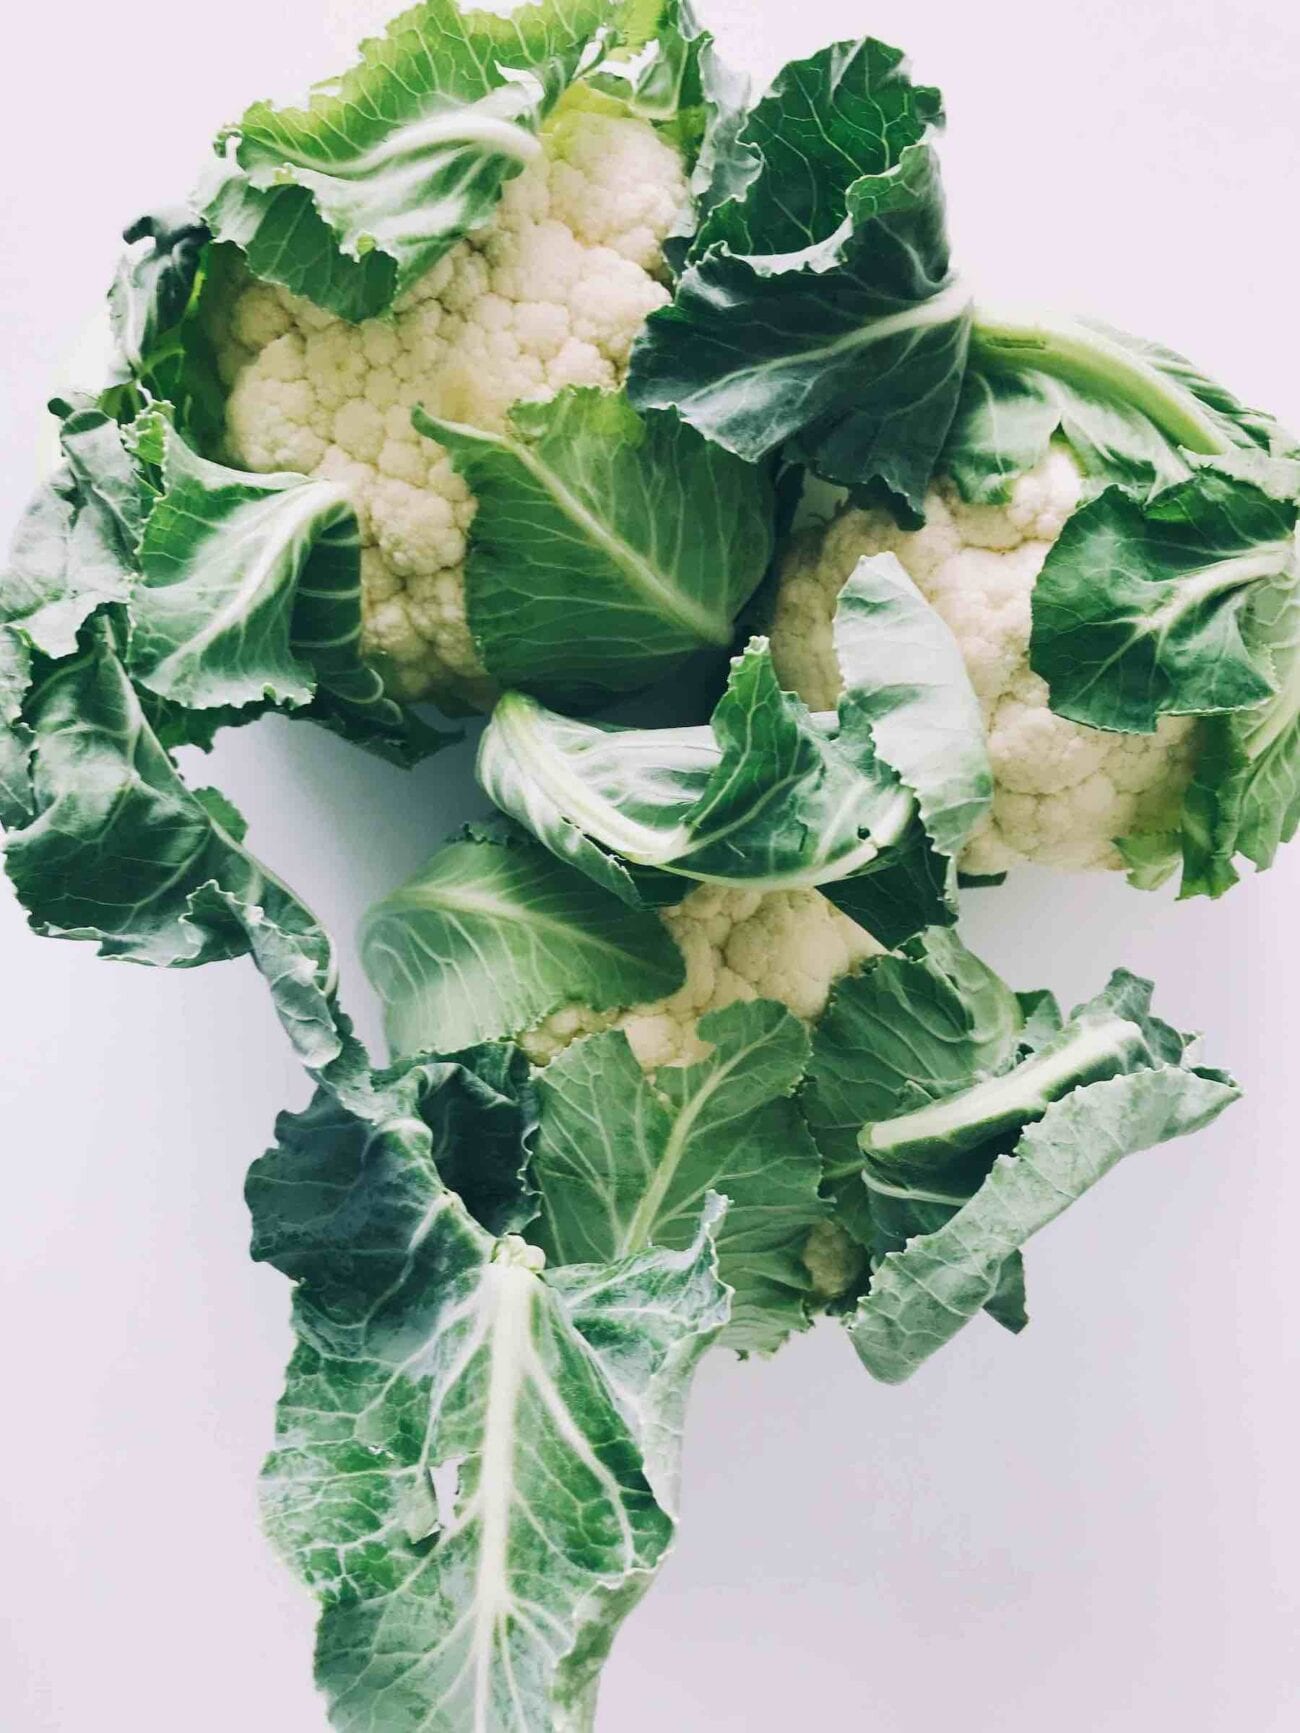 Cauliflower rice is a healthy yet tasty substitute for real rice. Check out all our favorite riced cauliflower recipes here for some yummy goodness.